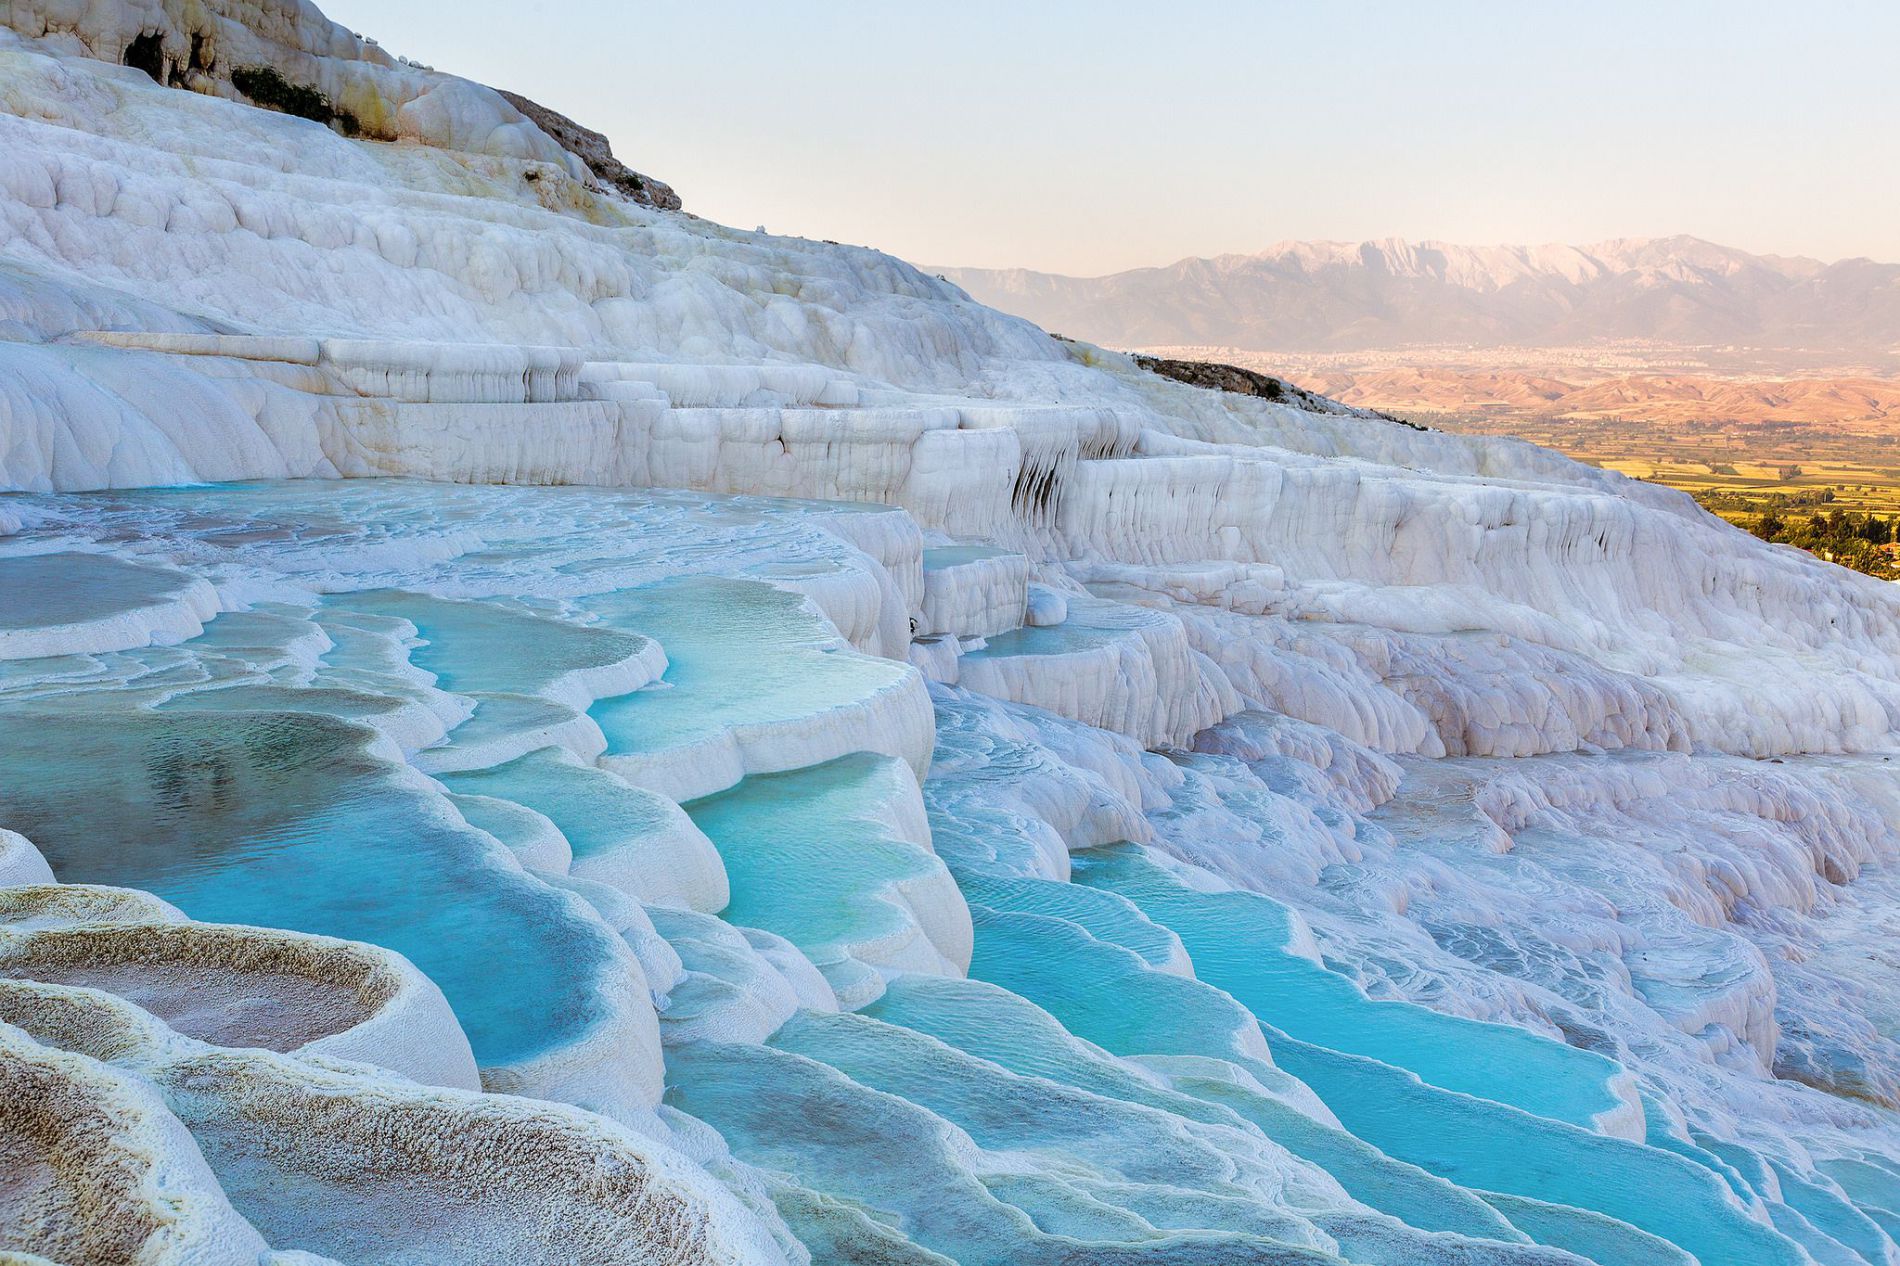 Ephesus and Pamukkale: Day Trip by Plane from Istanbul